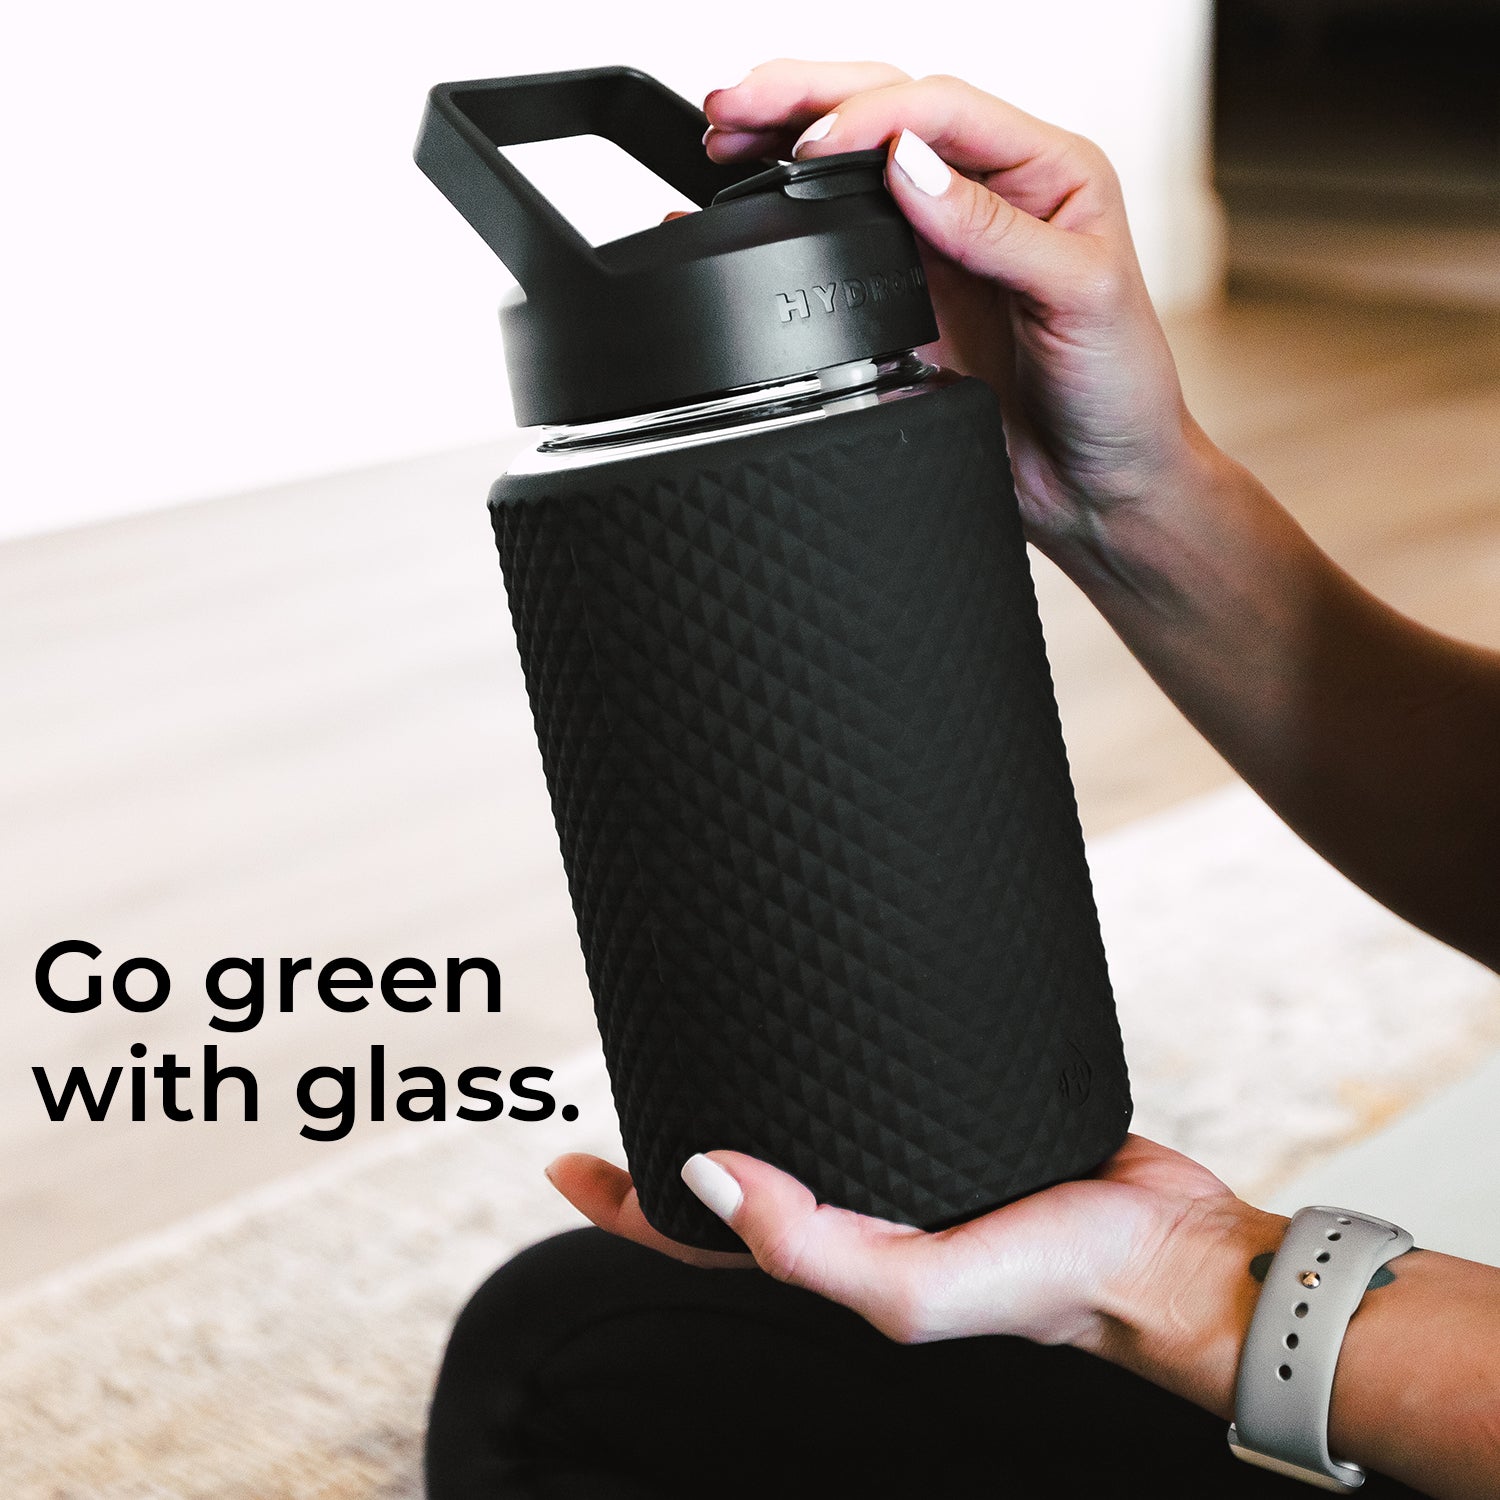 Why is Borosilicate Glass Best for Reusable Water Bottles